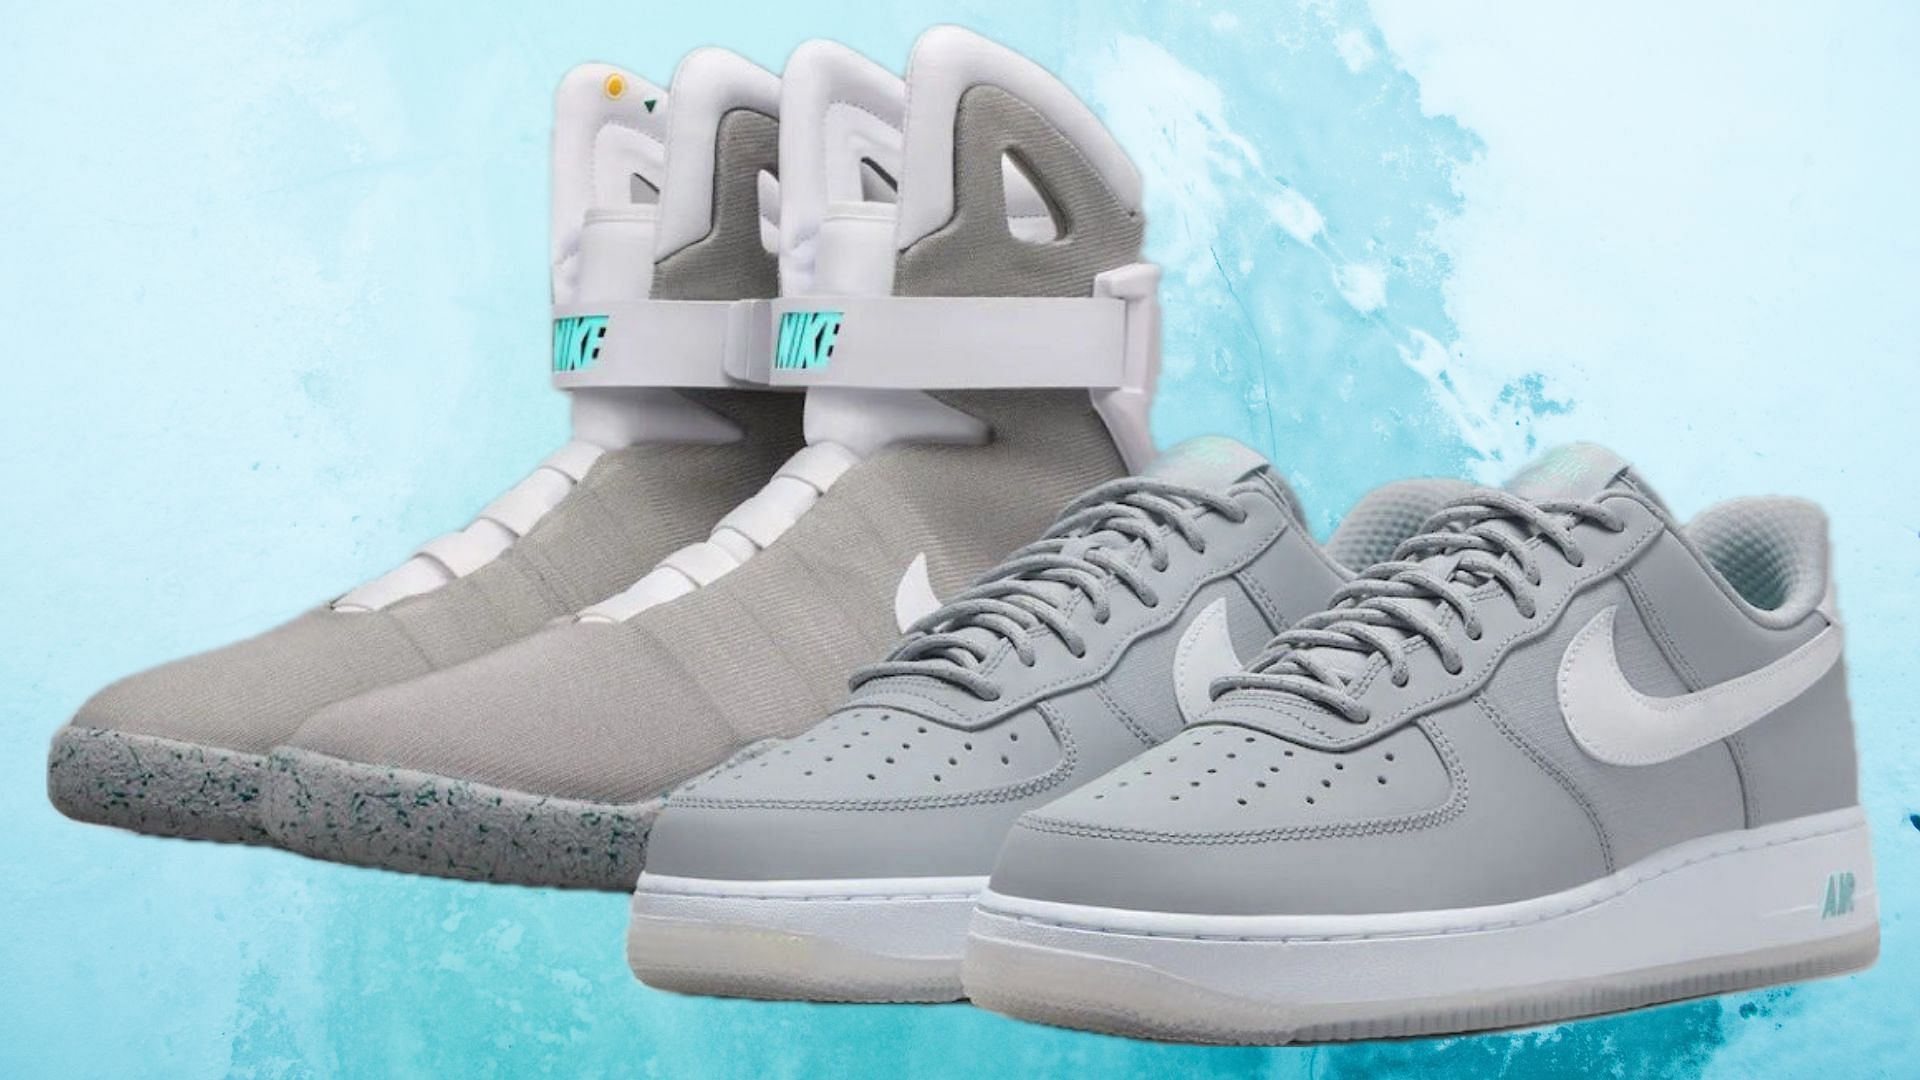 D.w.z advies Overblijvend Air Mag: Nike Air Force 1 Low "Mag" shoes: Where to get, price, and more  details explored